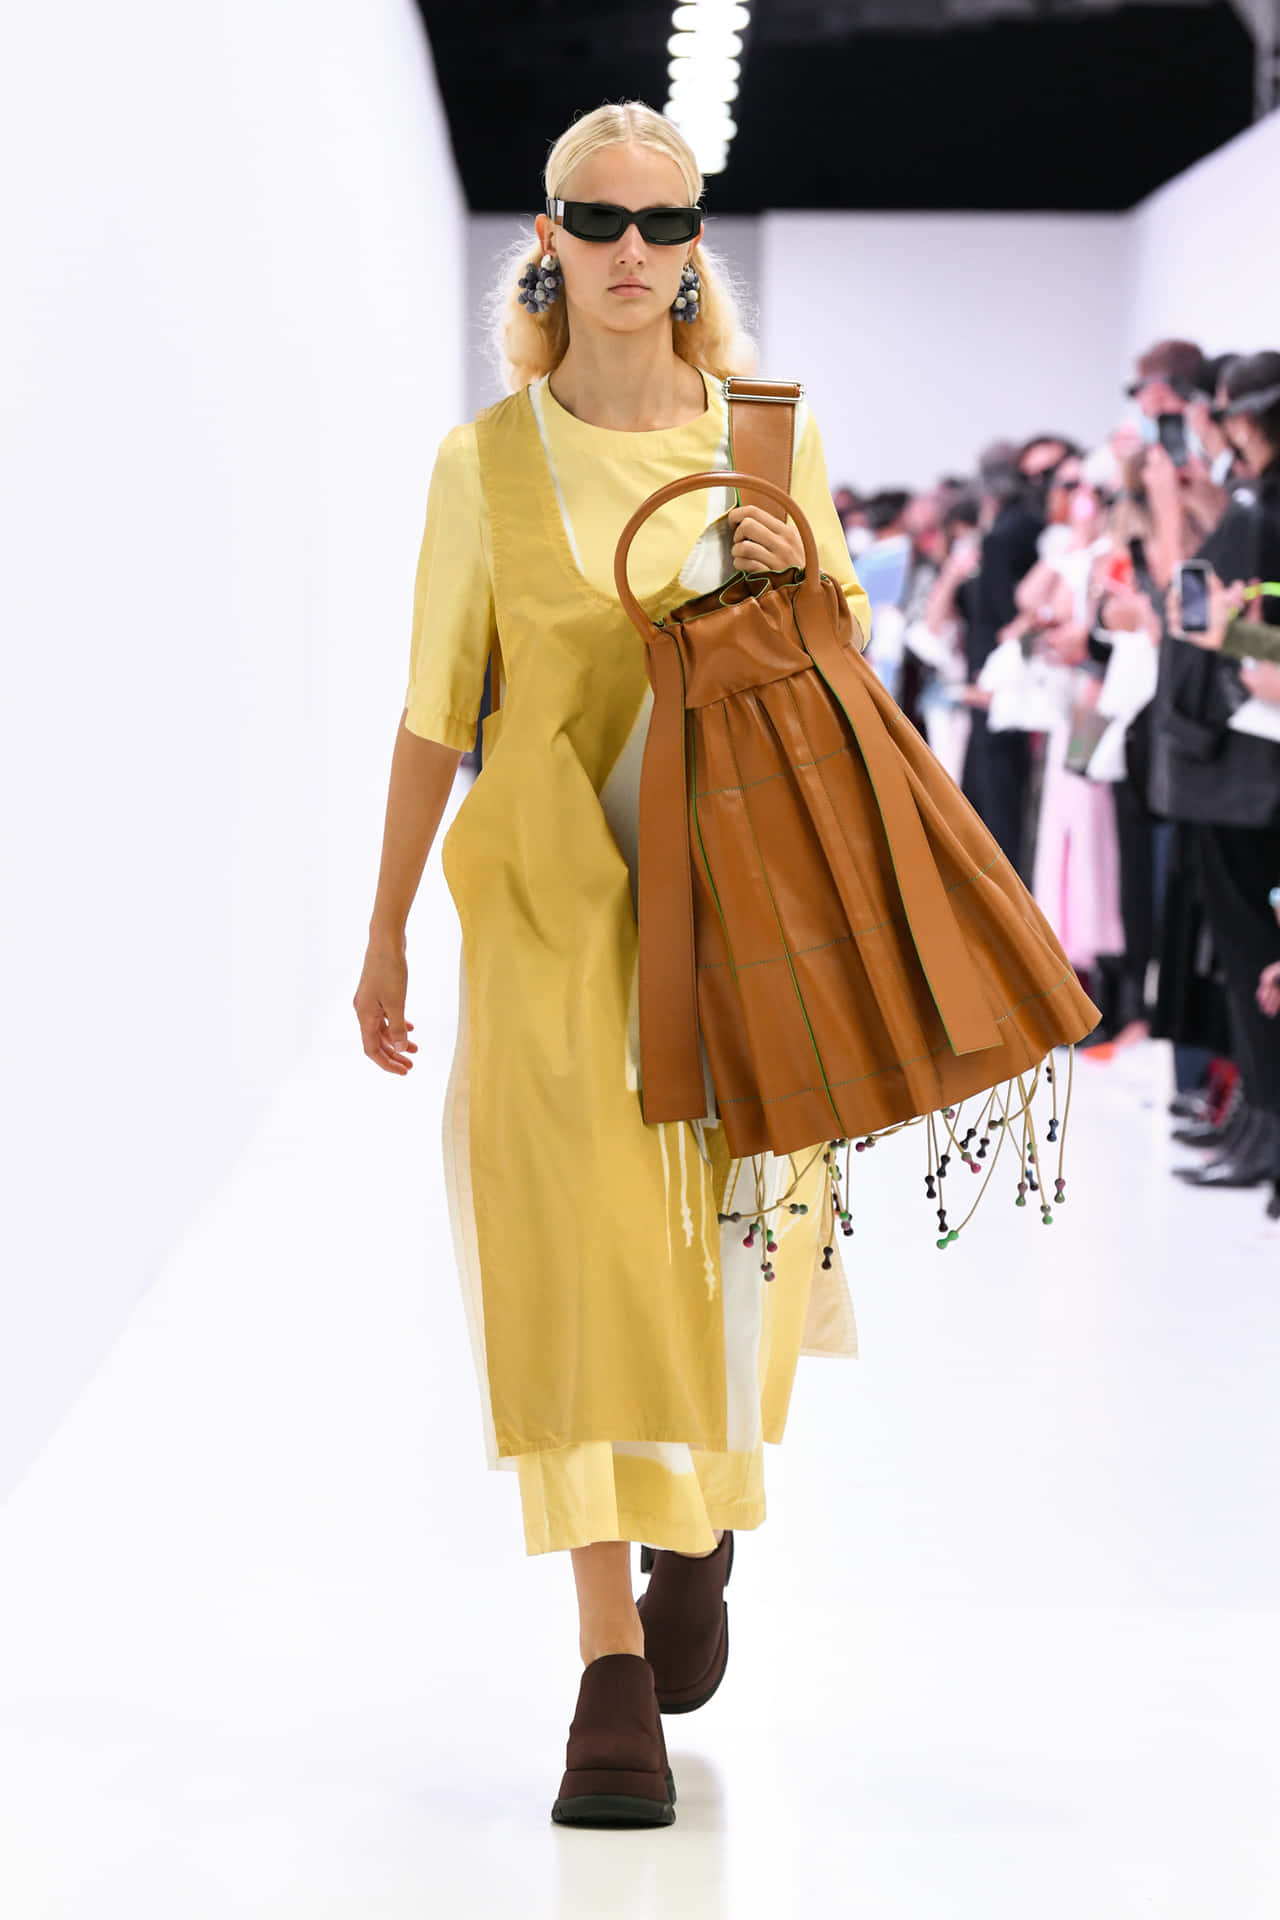 Sunnei Model With Yellow Outfit And Brown Bag Wallpaper